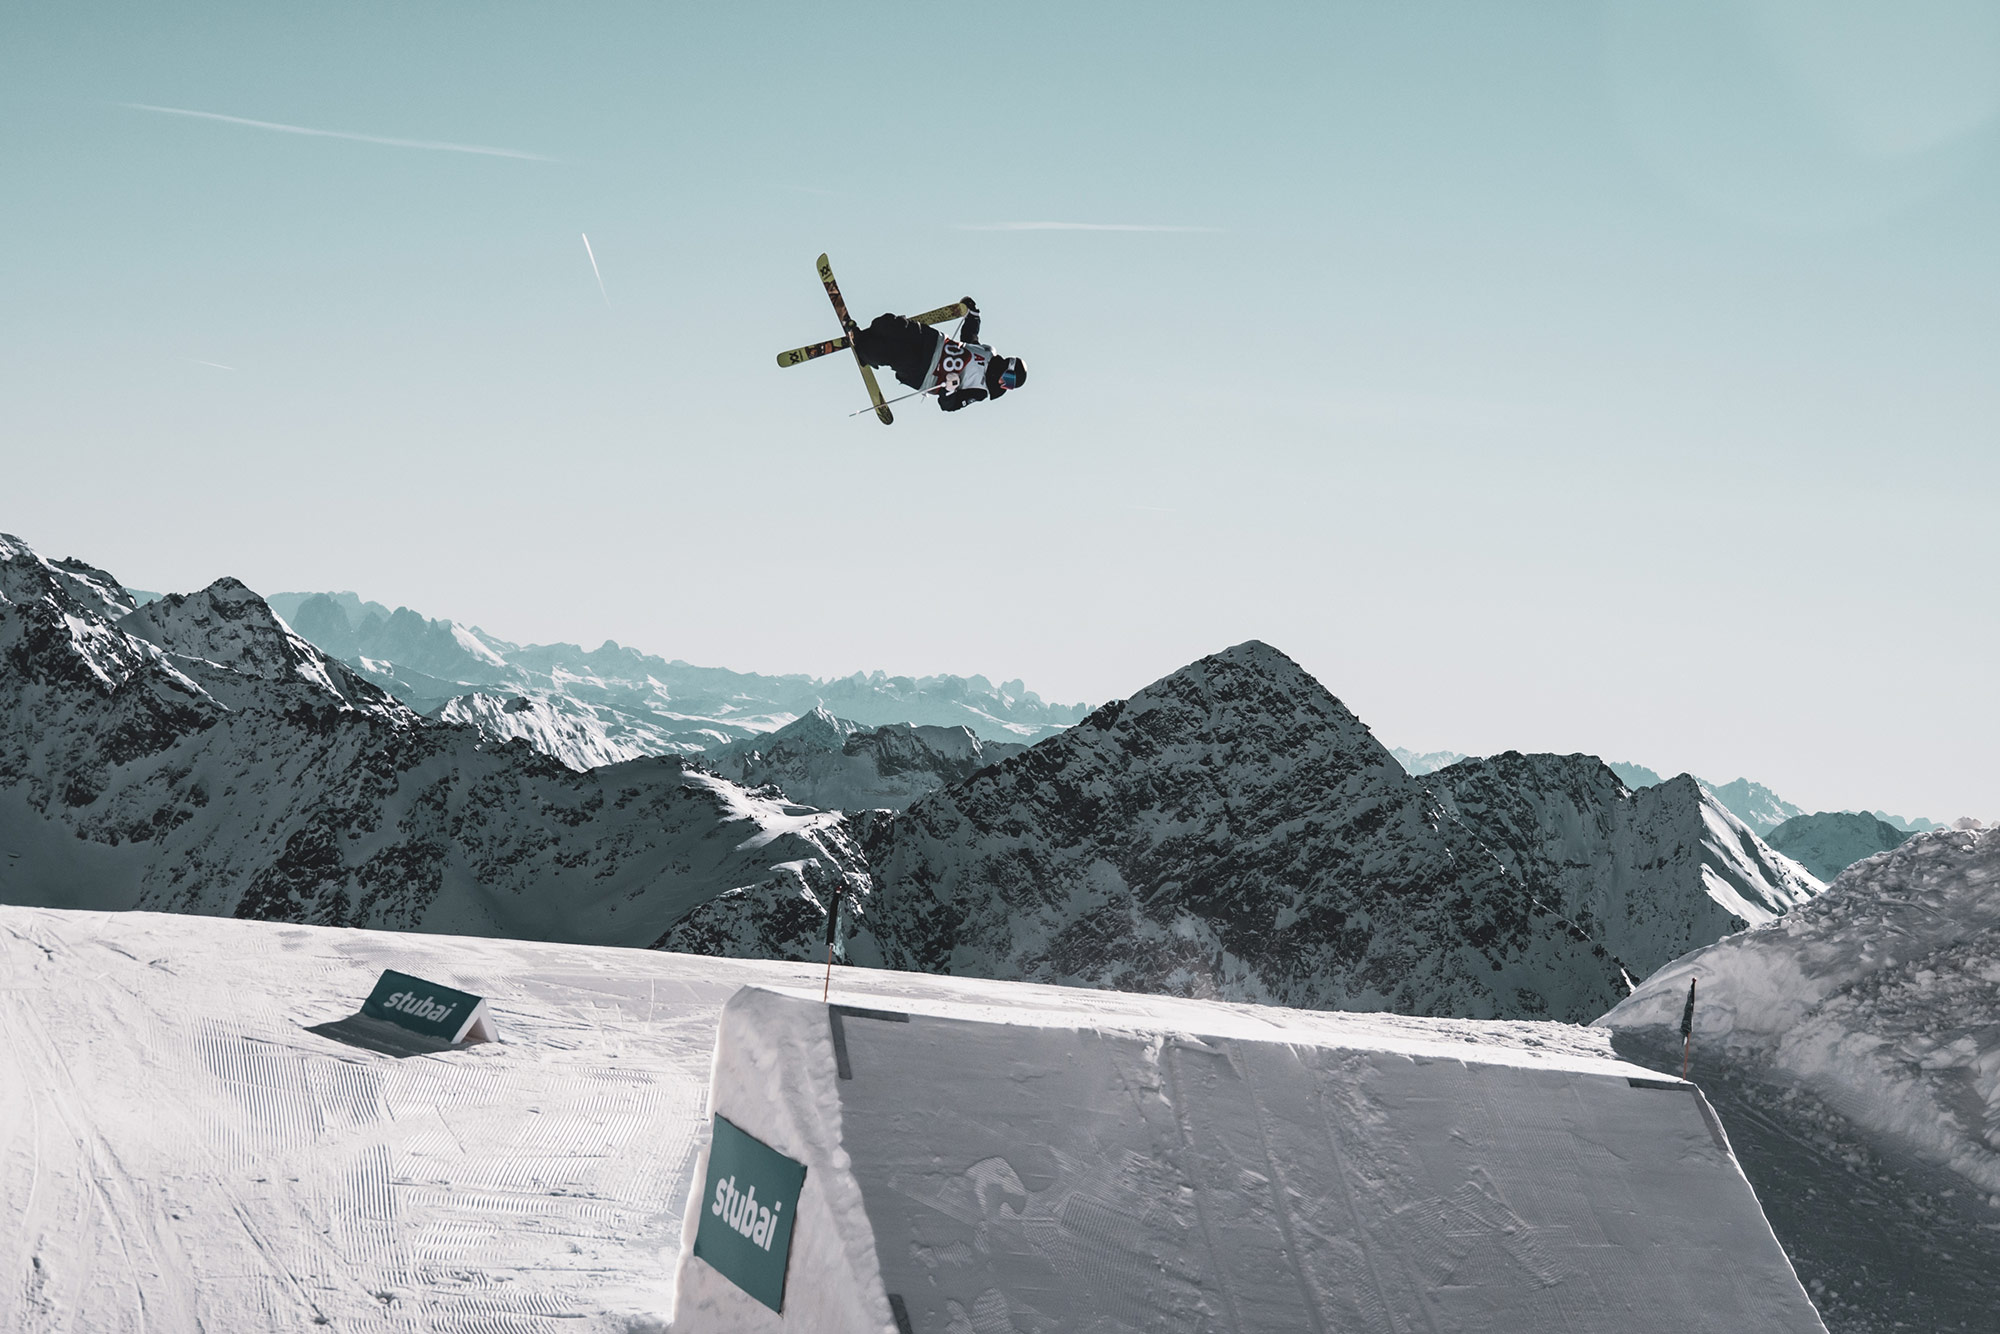 Kirsty Muir competes at the Stubai World Cup Slopestyle